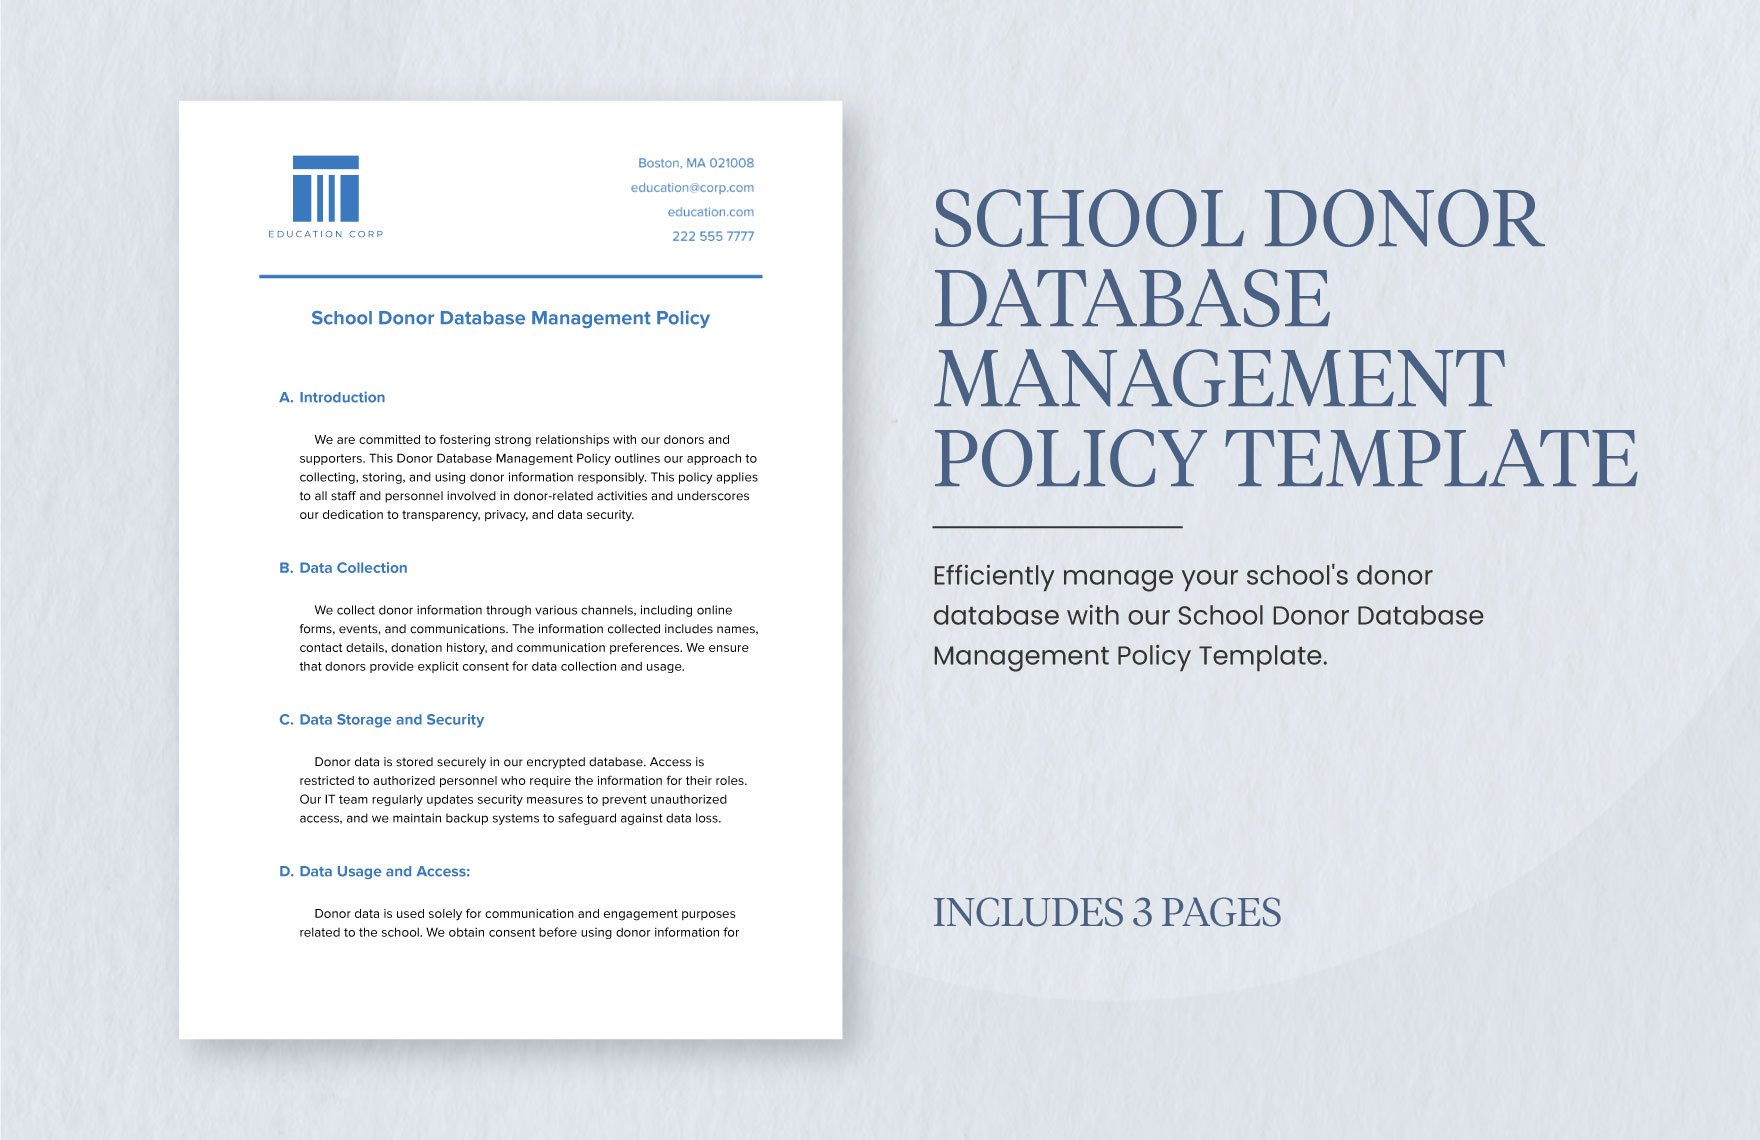 School Donor Database Management Policy Template in Word, Google Docs, PDF